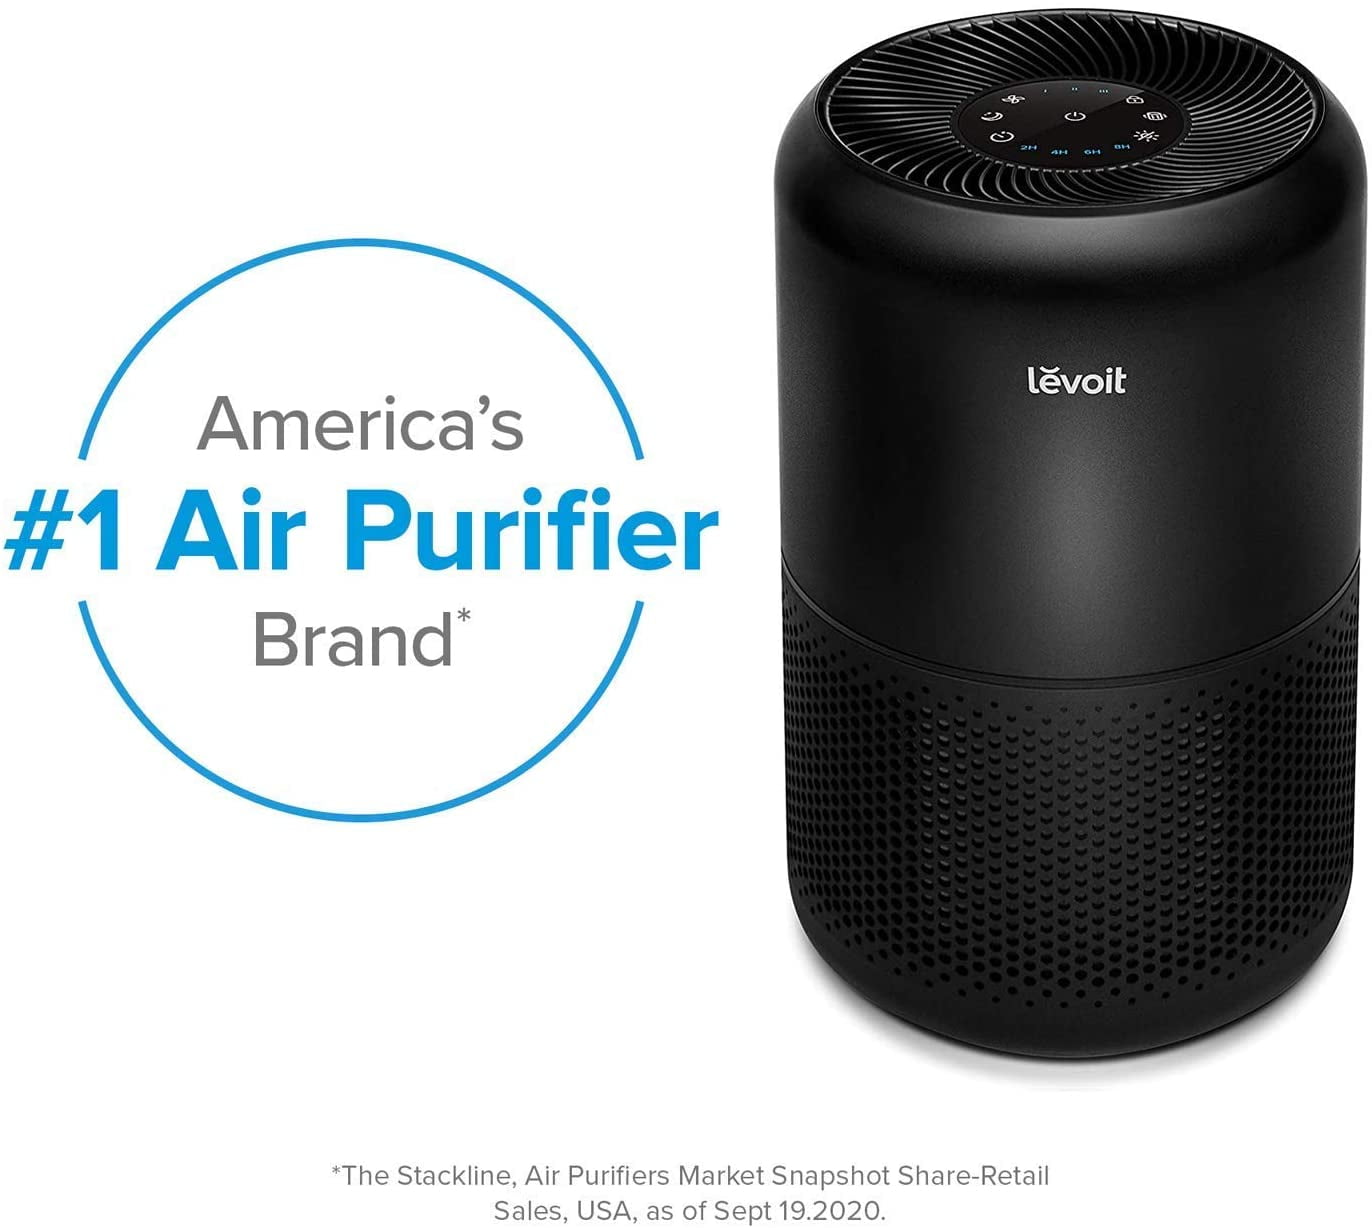 LEVOIT Air Purifiers for Home Smokers Allergies and Pets Hair, True HEPA  Filter, Quiet in Bedroom, Filtration System Cleaner Eliminators, Odor Smoke